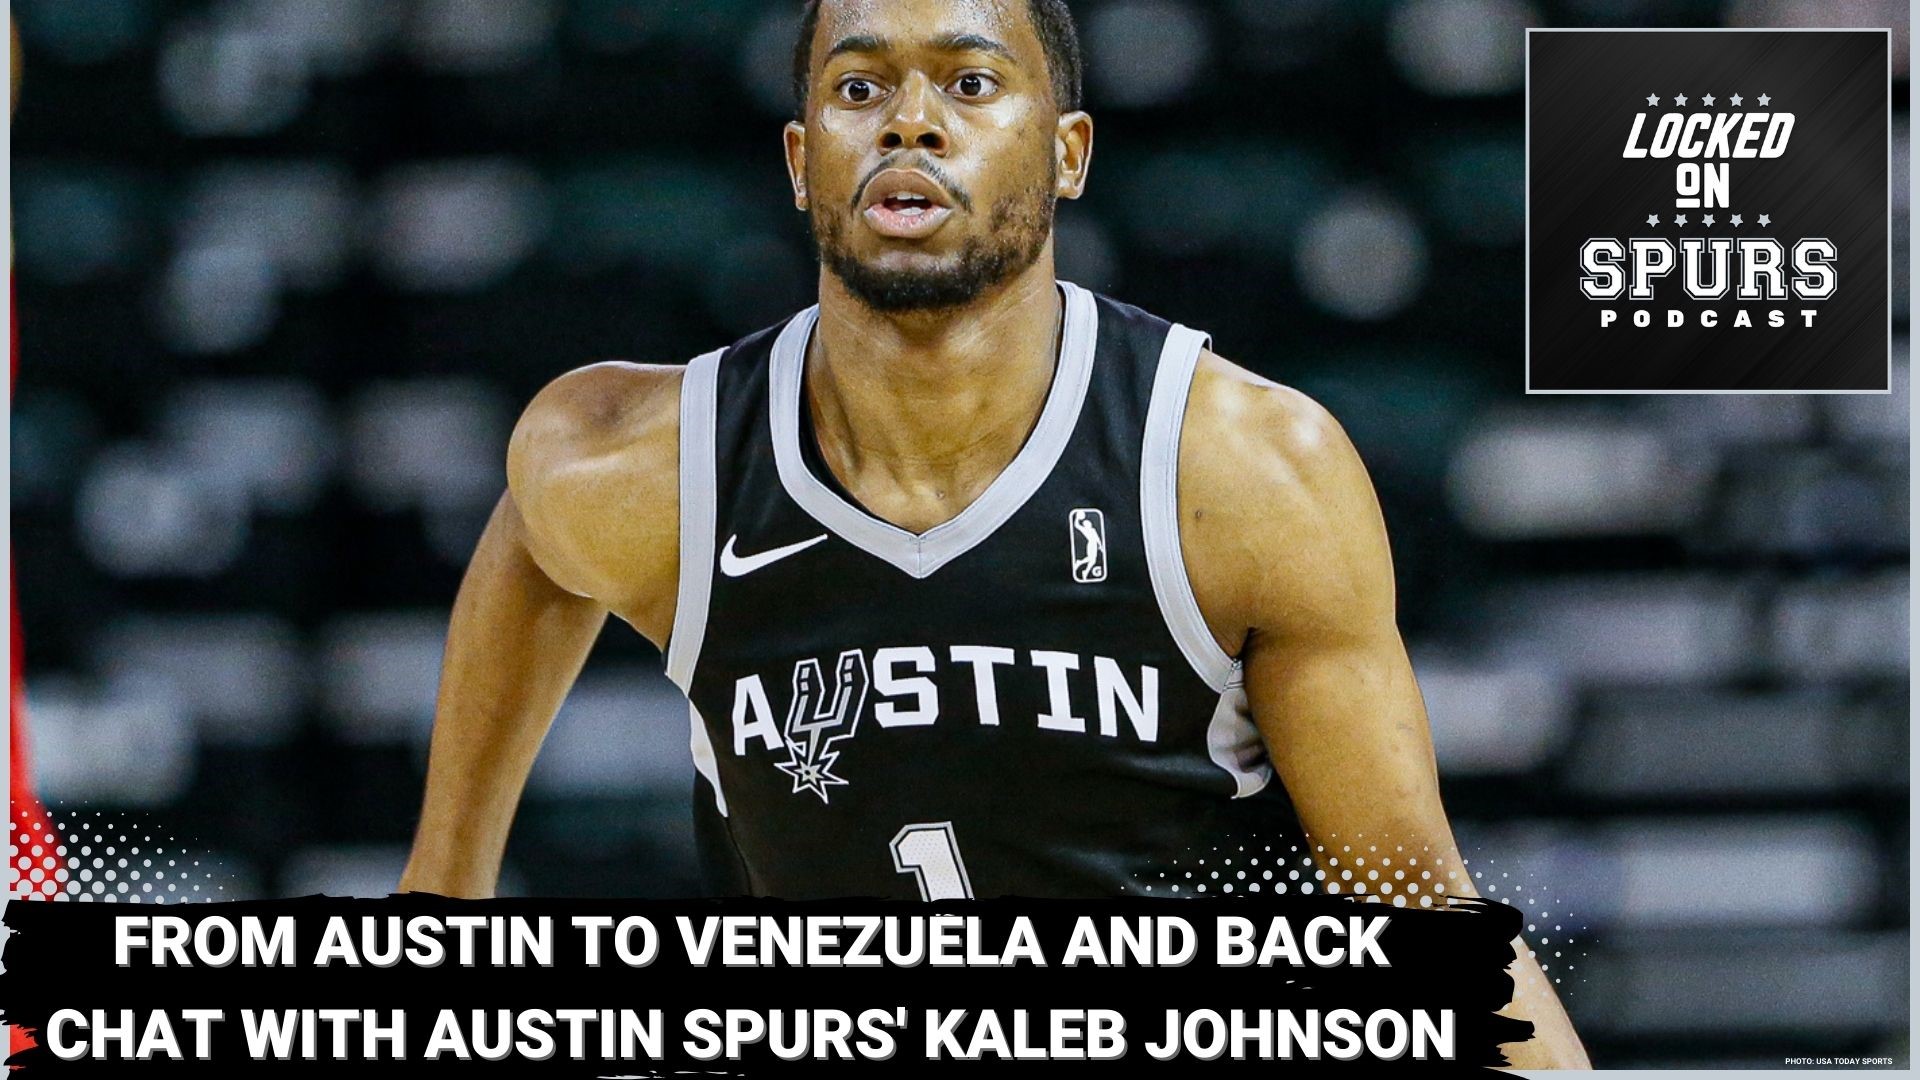 Kaleb talks about his pro-basketball career, how much the Spurs are about family, and much more.